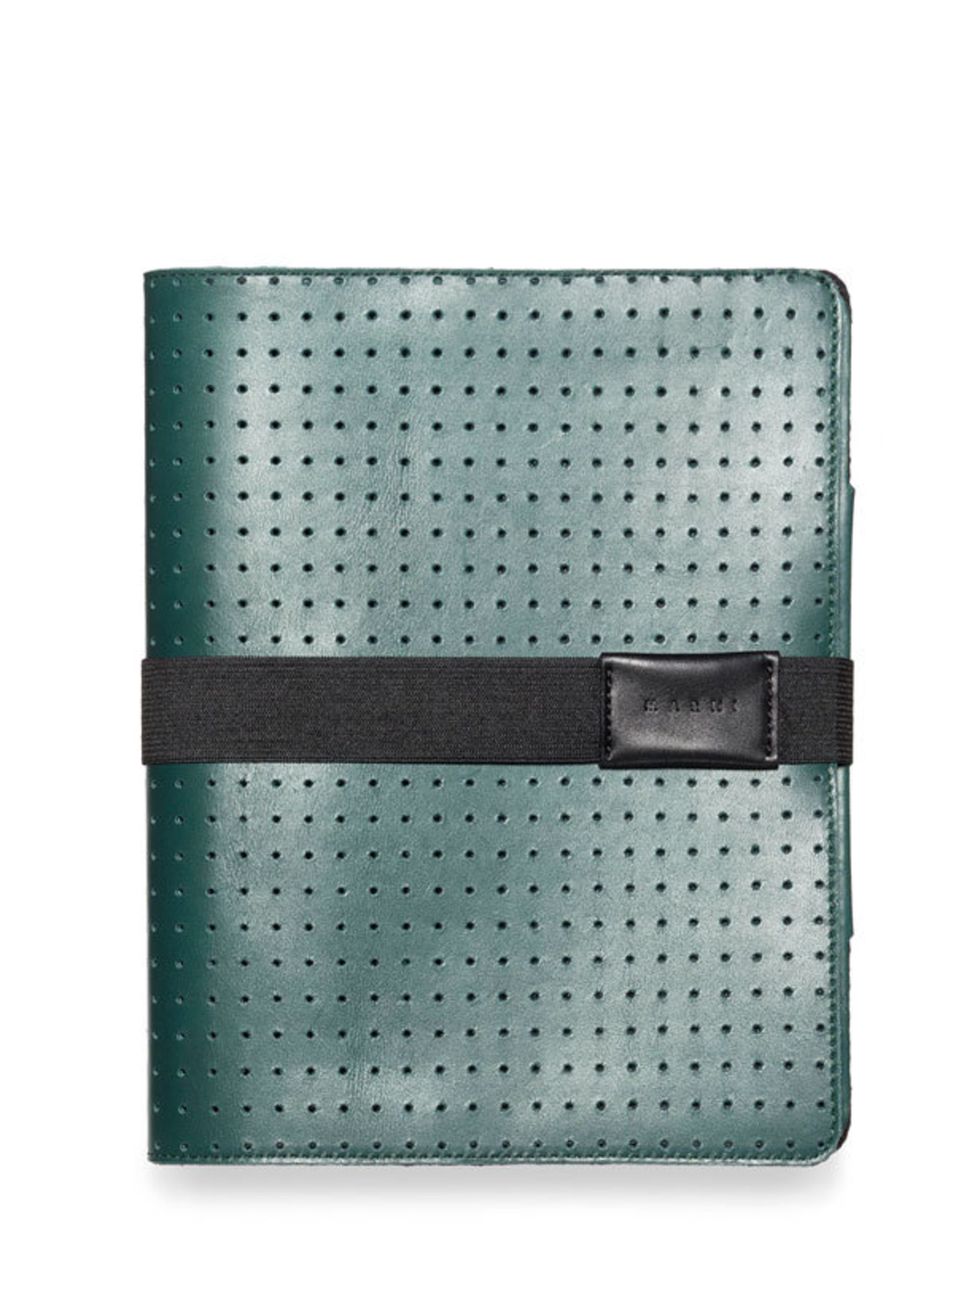 <p>Marni perforated leather iPad case, £234, for stockists call 0207 245 9520</p>